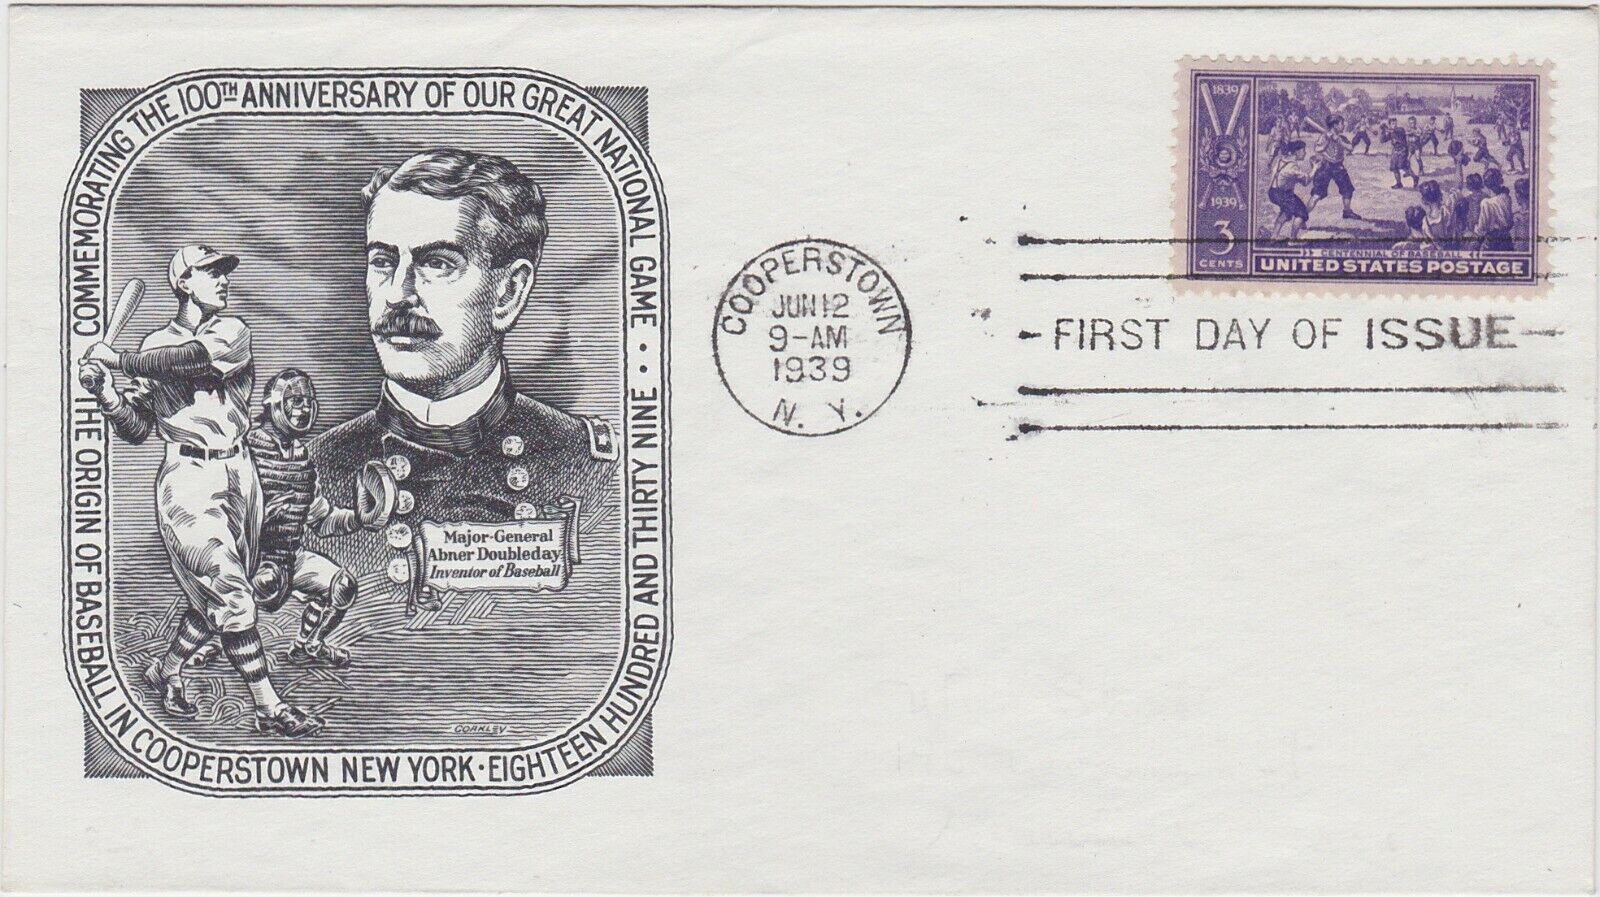 KAPPYS W6457 FDC 855 BASEBALL ARISTOCRATS CACHET COOPERSTOWN UA FIRST DAY COVER 